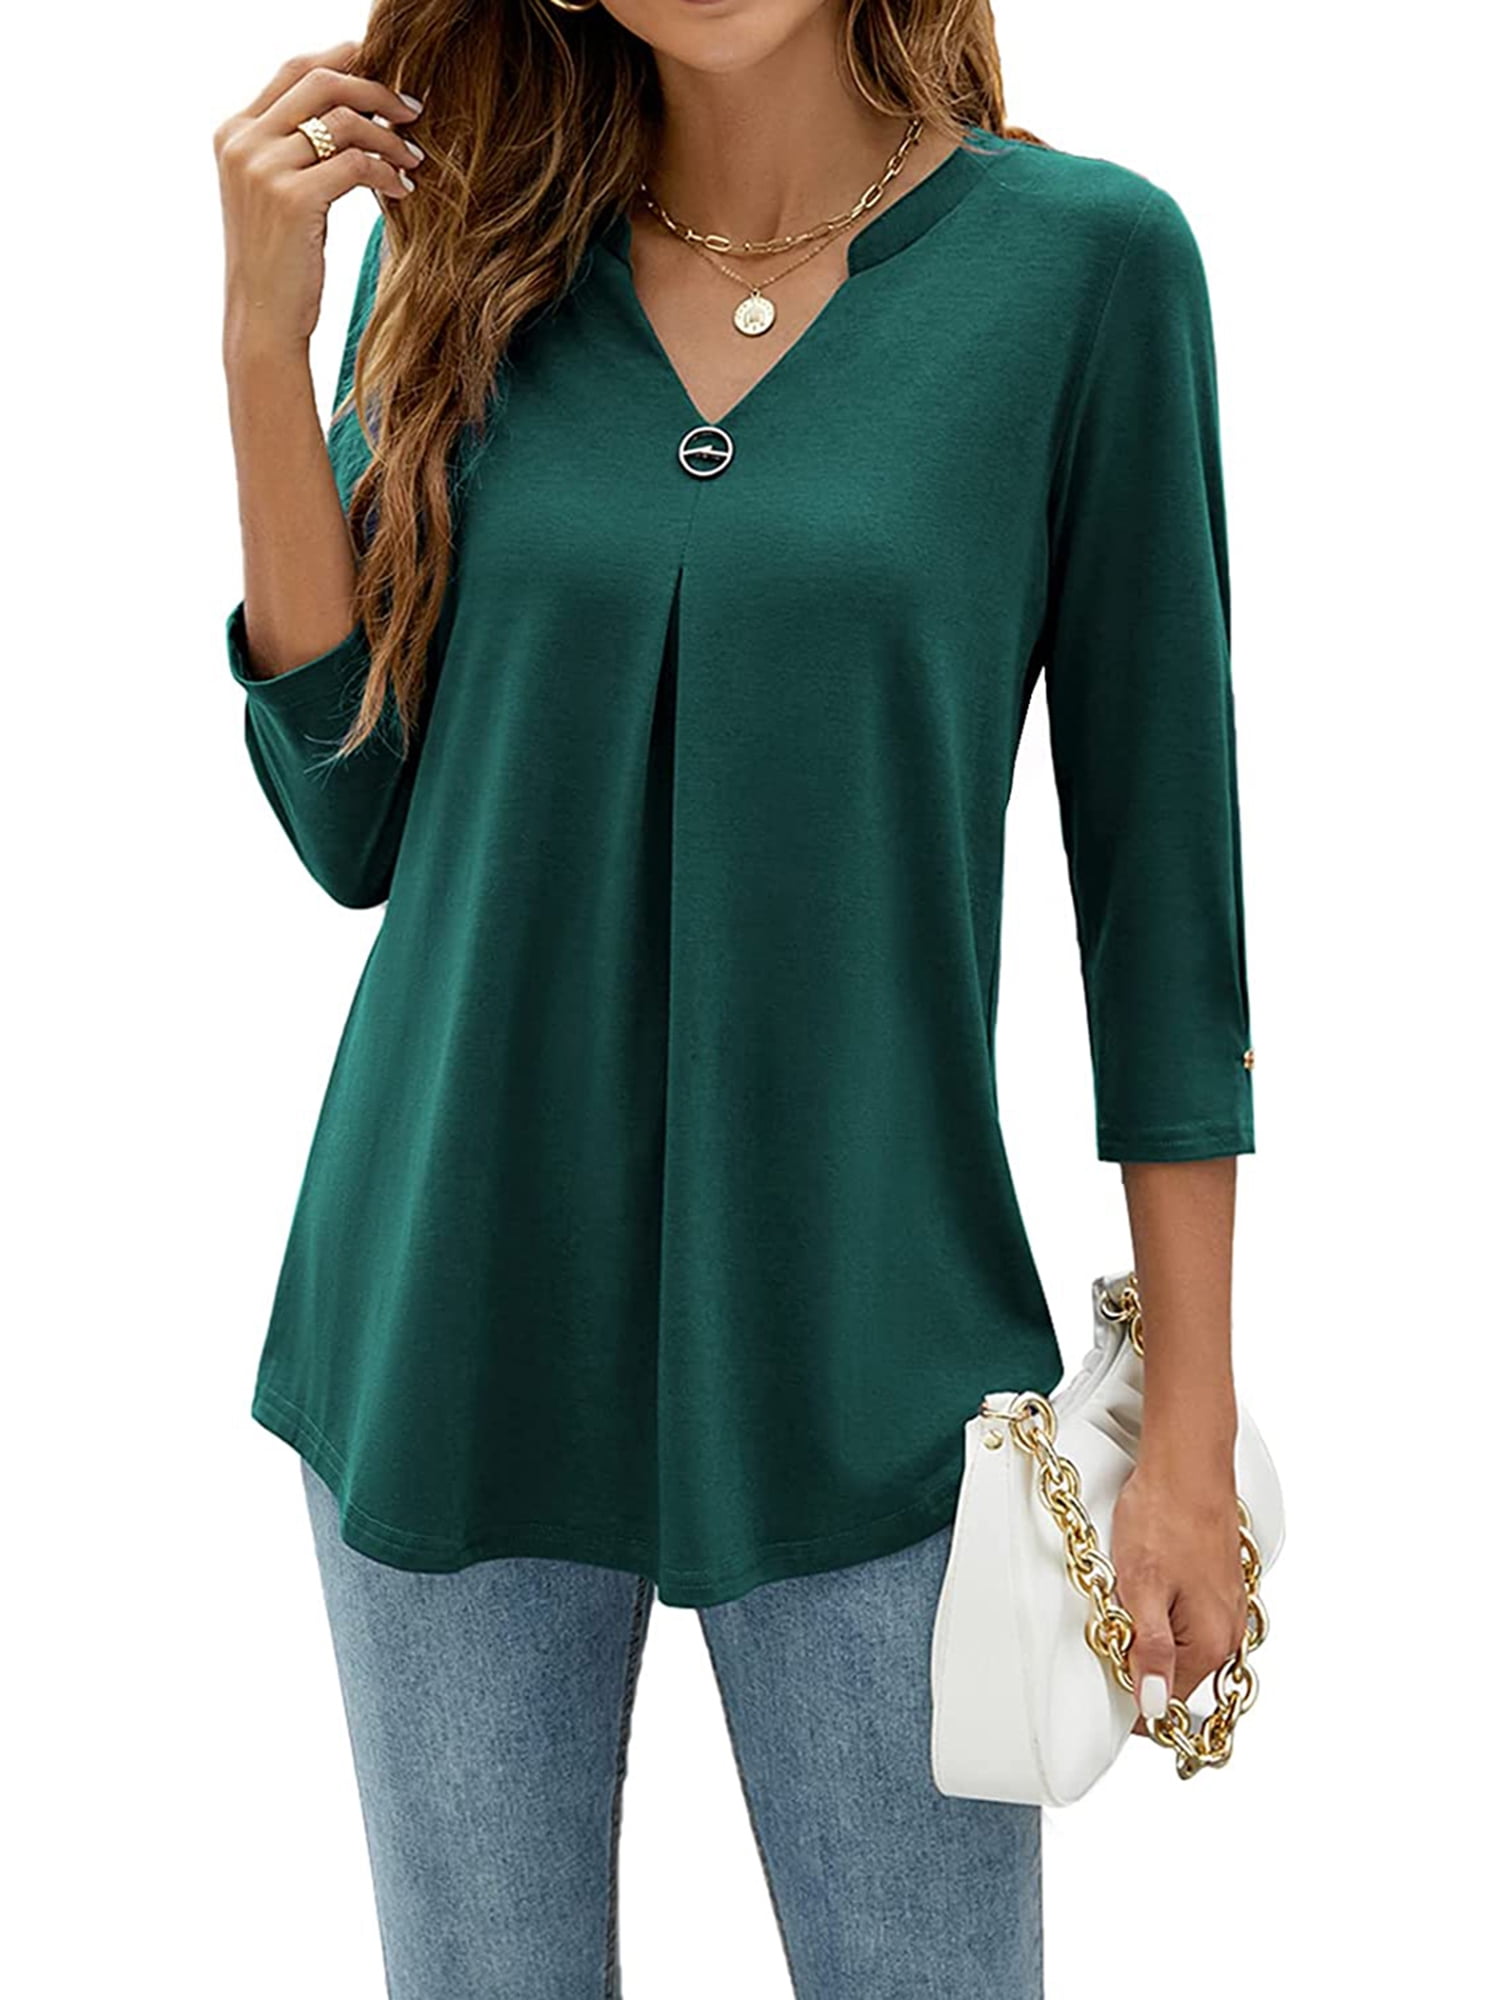 ESASSALY Women 3/4 Sleeve V-Neck Blouses Button-down ShirtsTops Spring ...